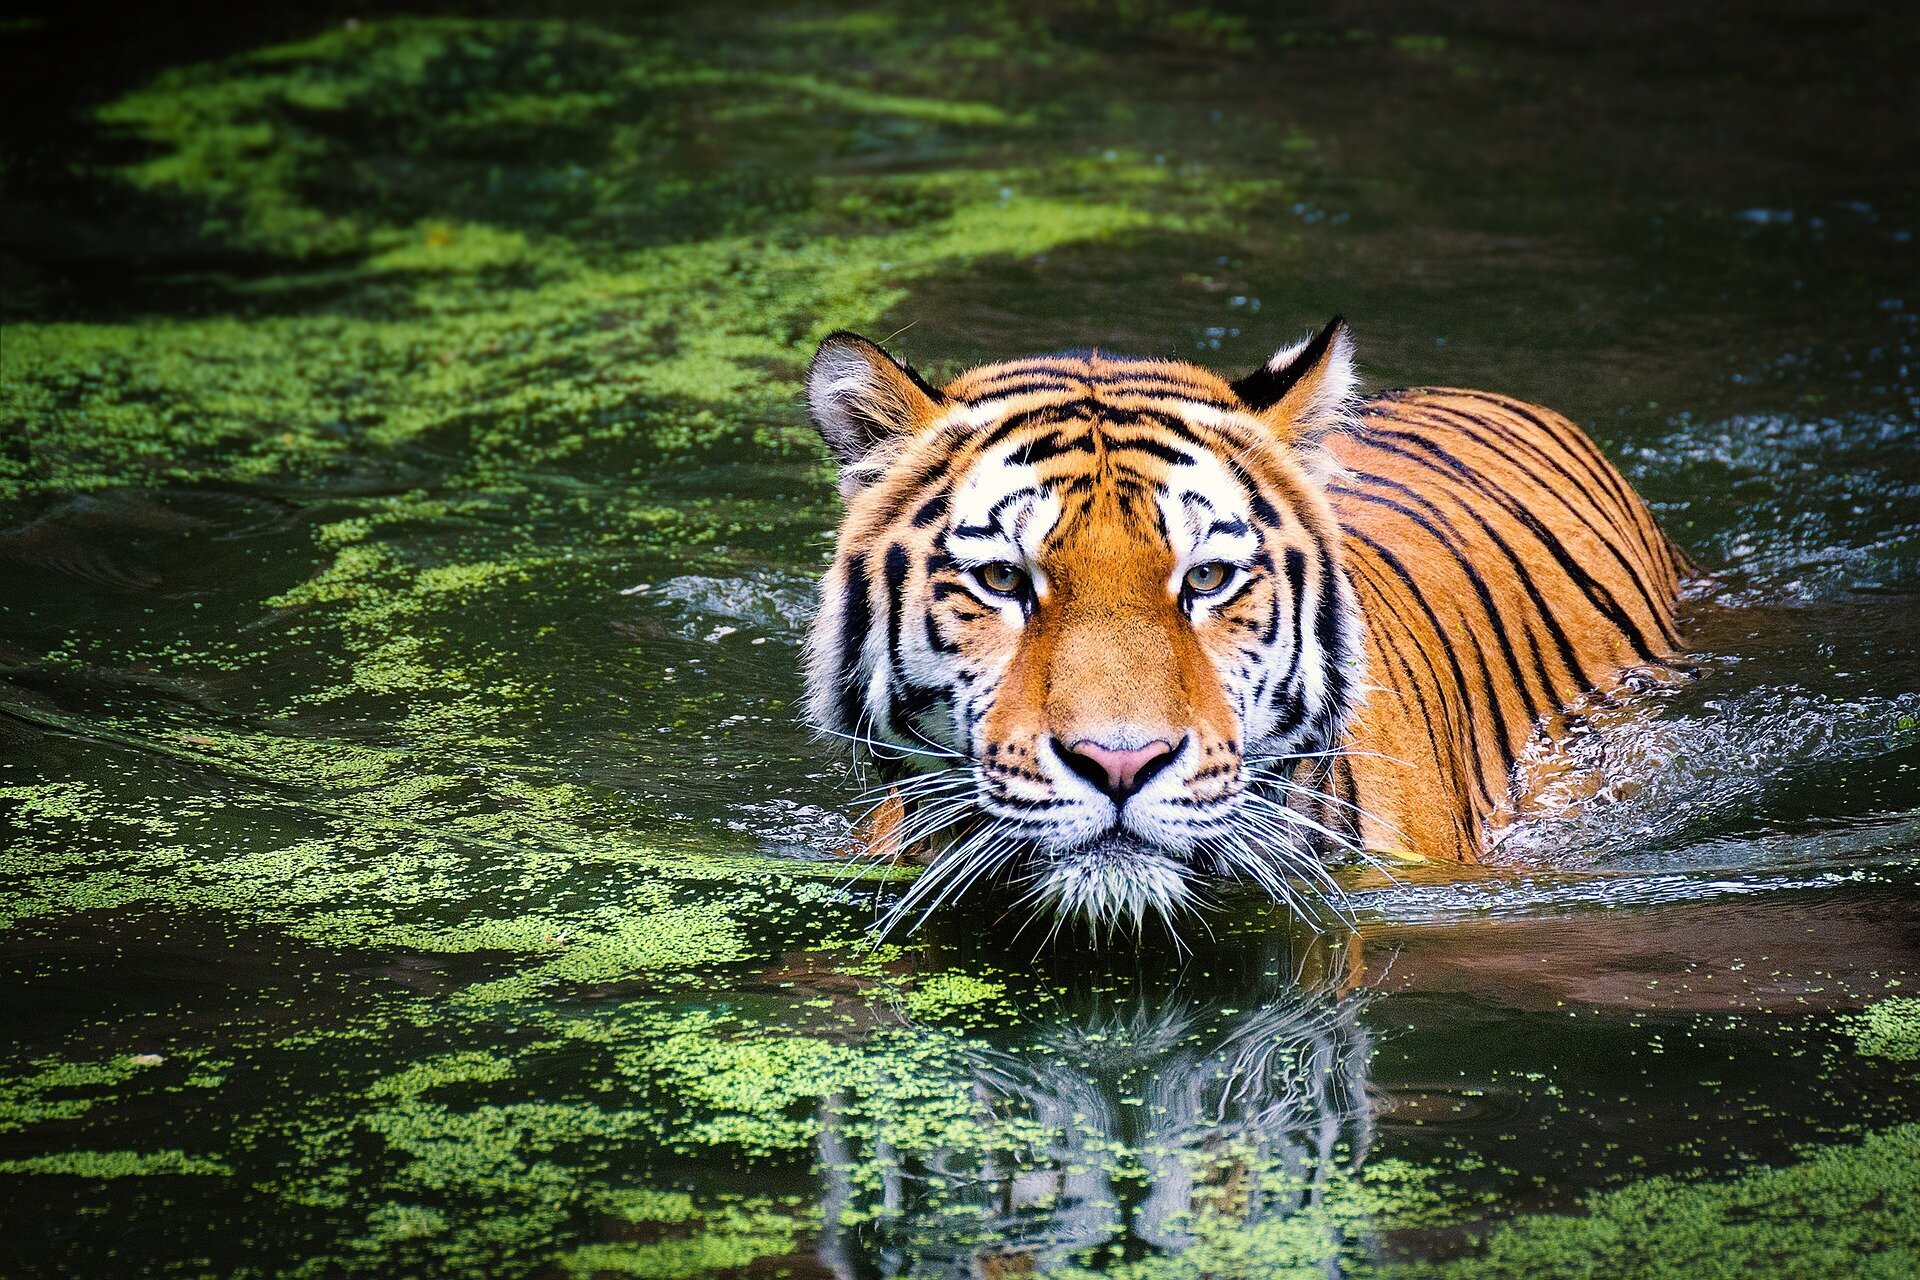 Great news for the endangered tiger: A 250% increase in tiger numbers recorded in Thailand